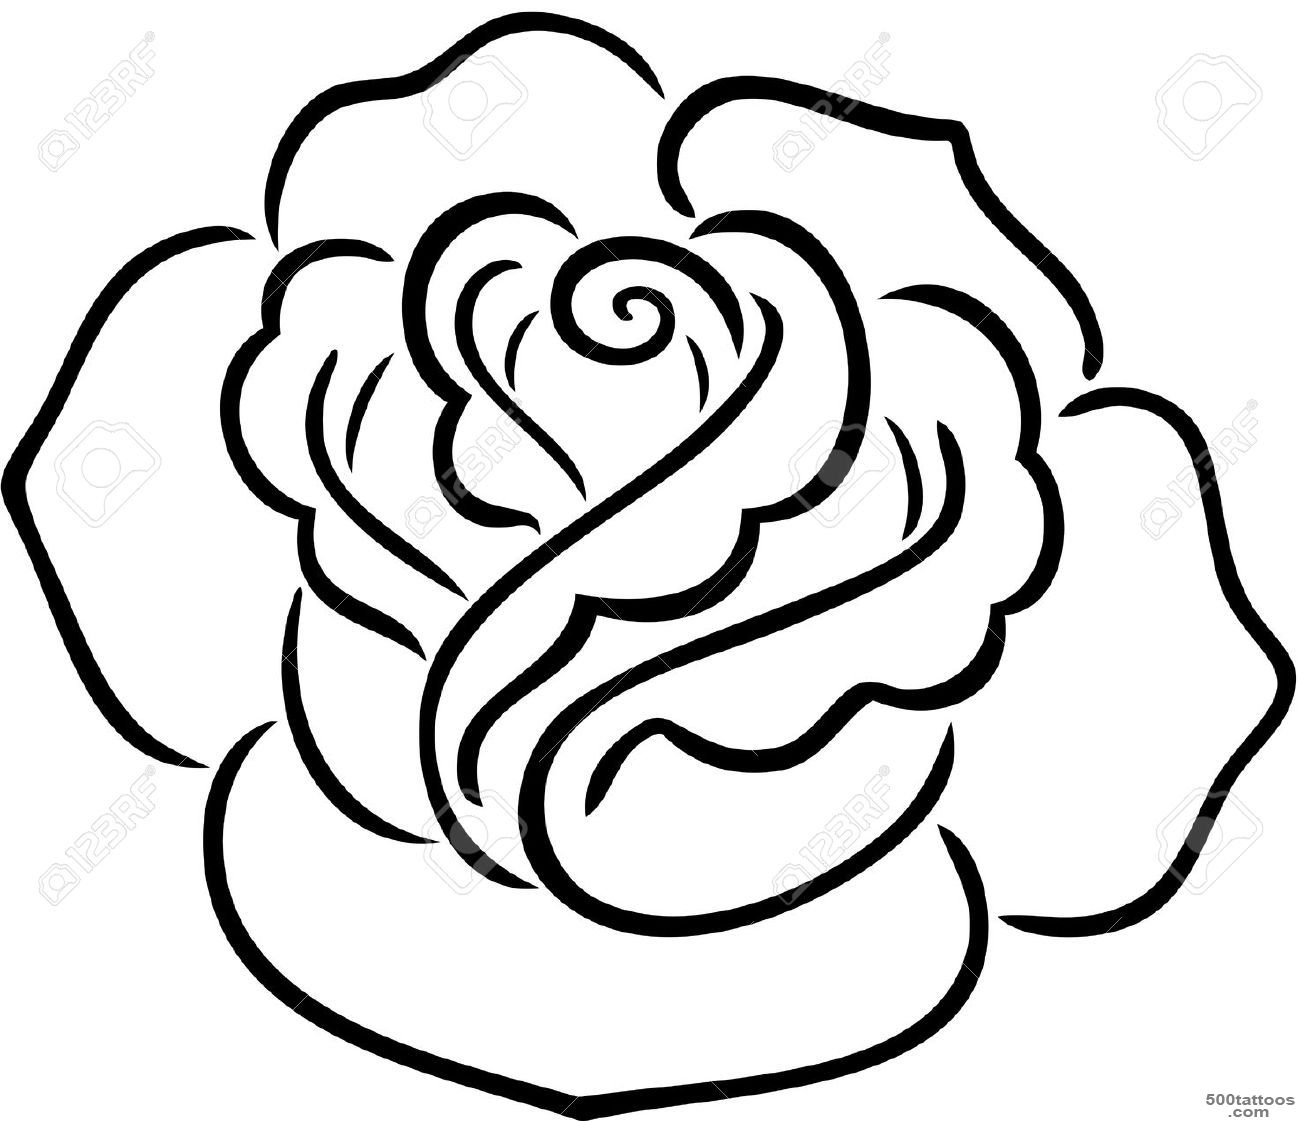 A Decorative Tattoo Of A Rose, Isolated. Royalty Free Cliparts ..._25